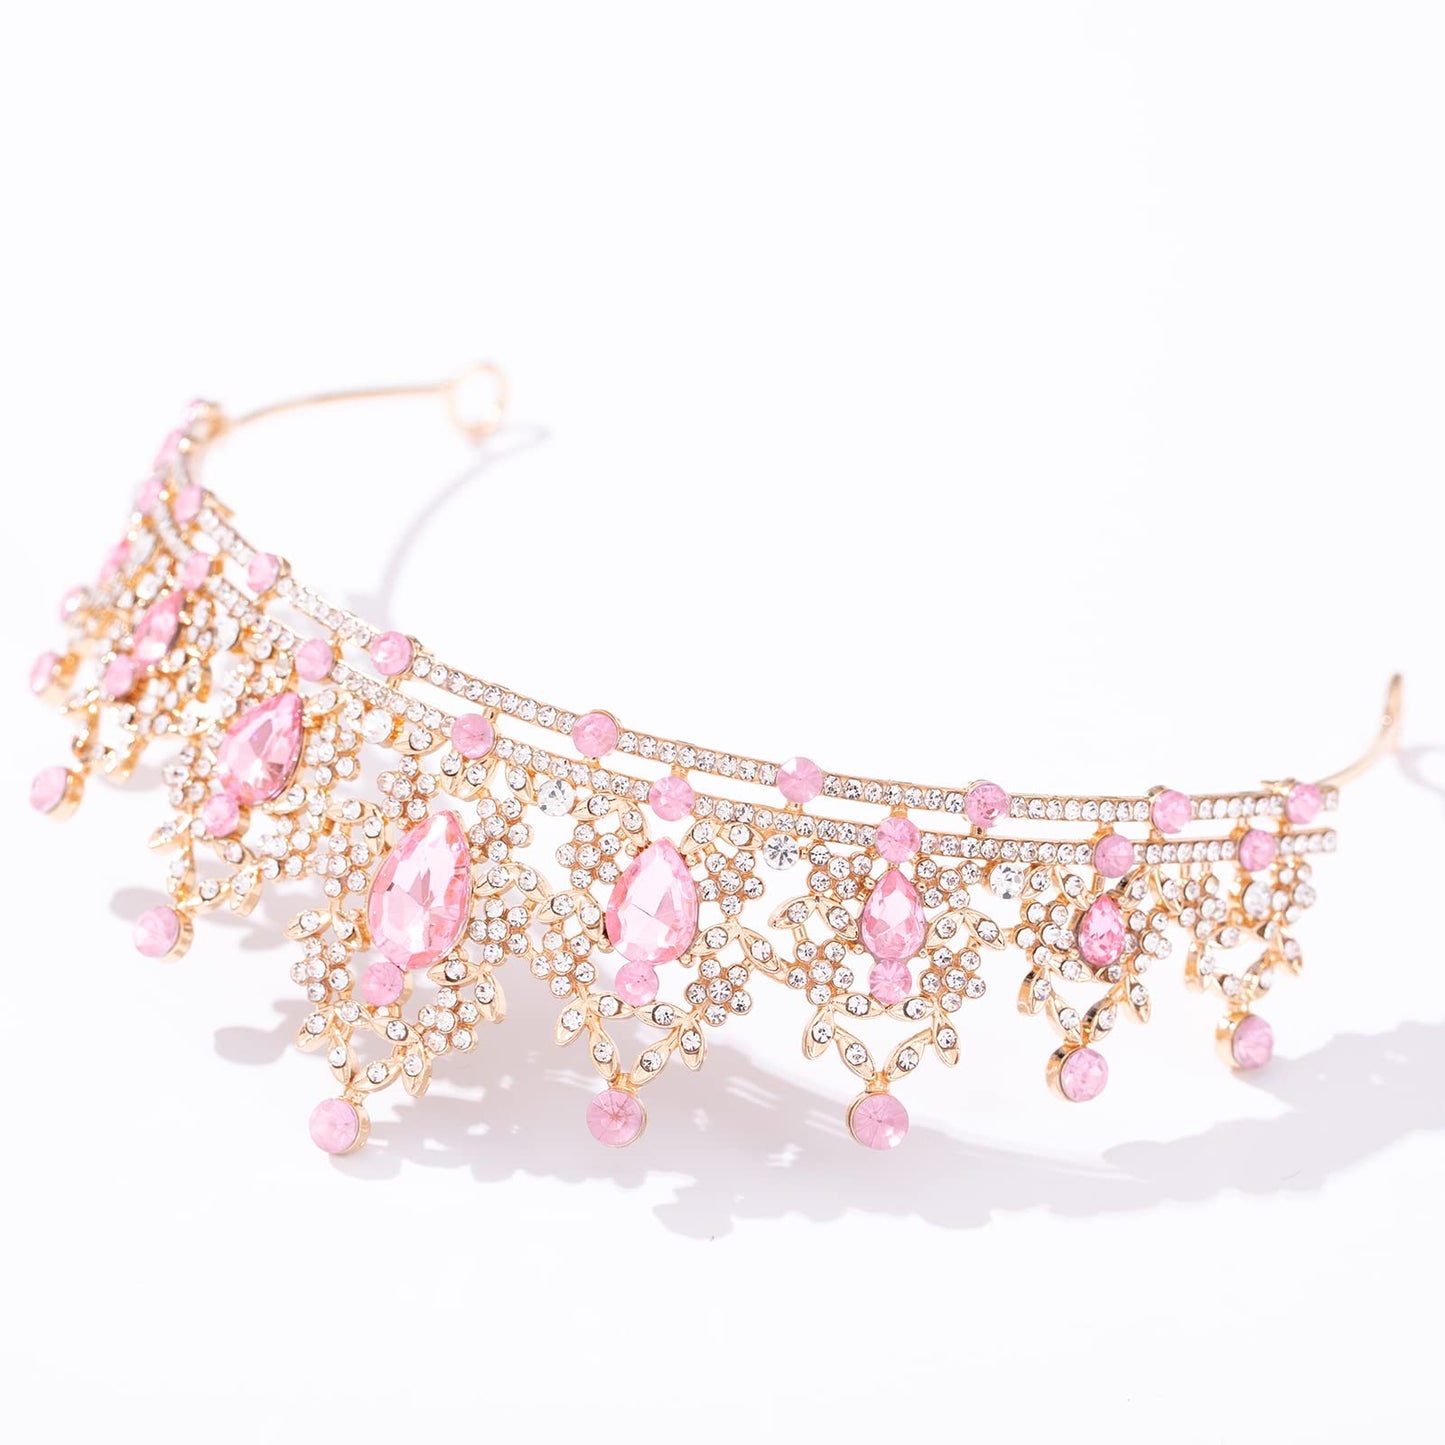 FORSEVEN Crystal Tiaras for Women, Wedding Tiaras and Crowns for Women Tiaras for Girls Birthday Party Princess Crown Hair Accessories Bride Rhinestone Headbands (Gold+Pink)